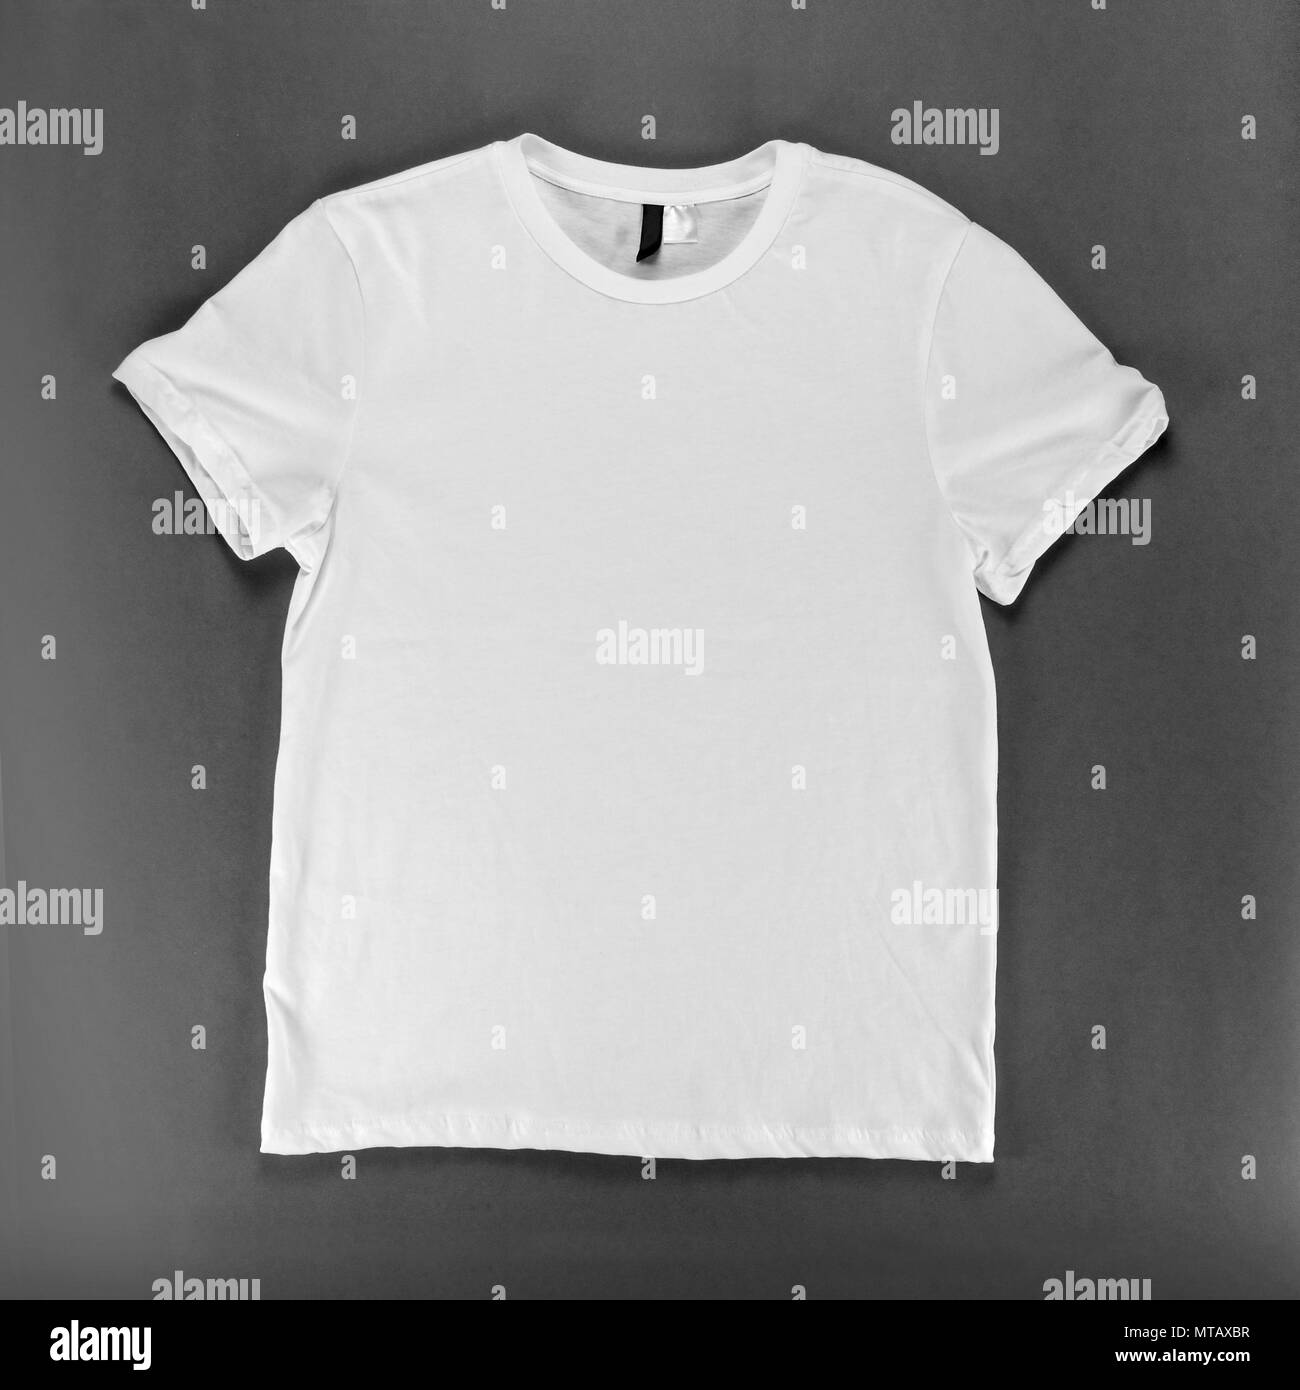 White t-shirt template on a gray background Stock Photo